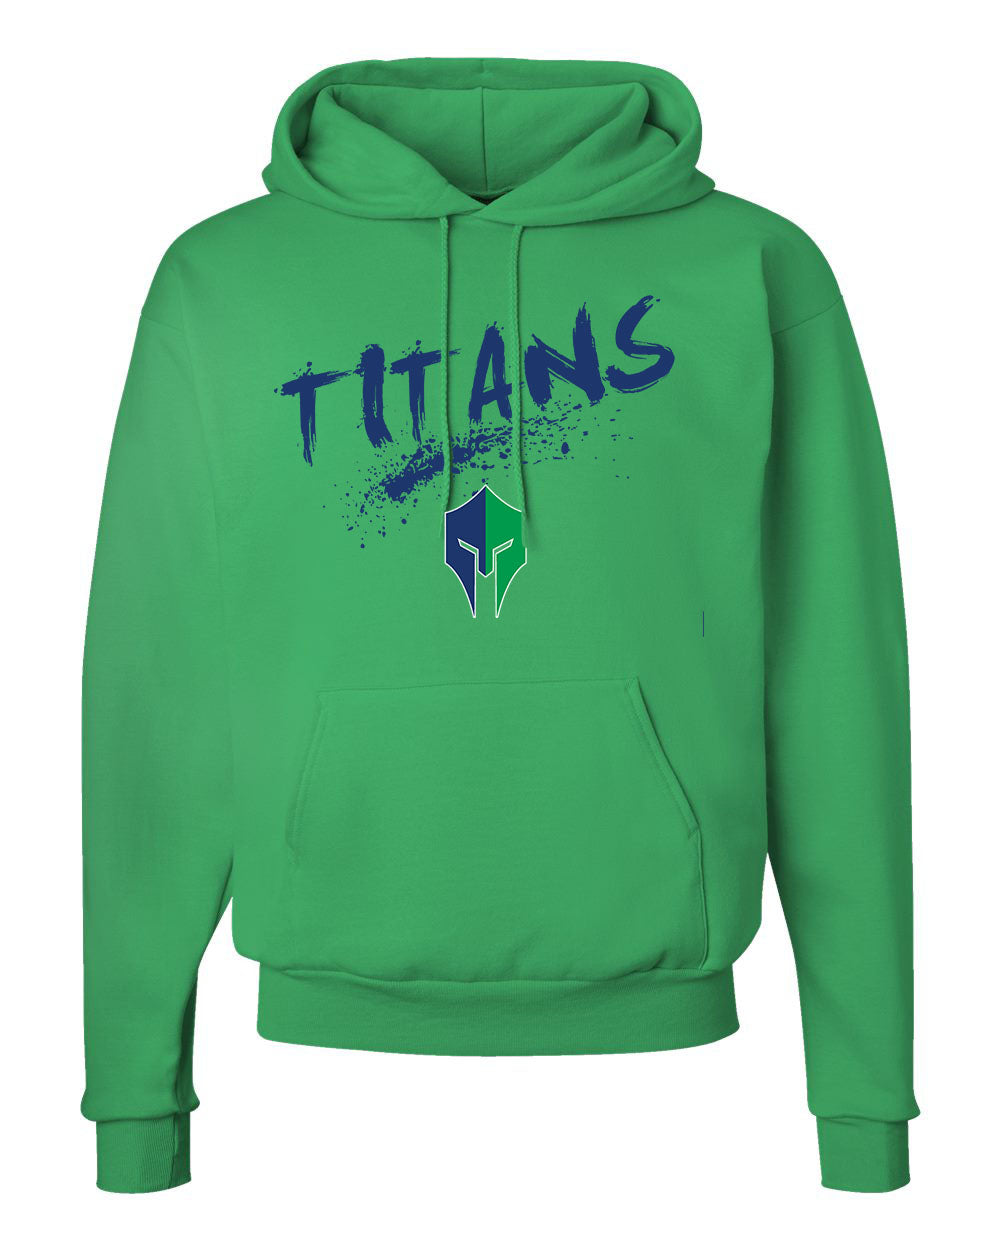 Titans Hoodie 50/50 "300" - 996MR (color options available)